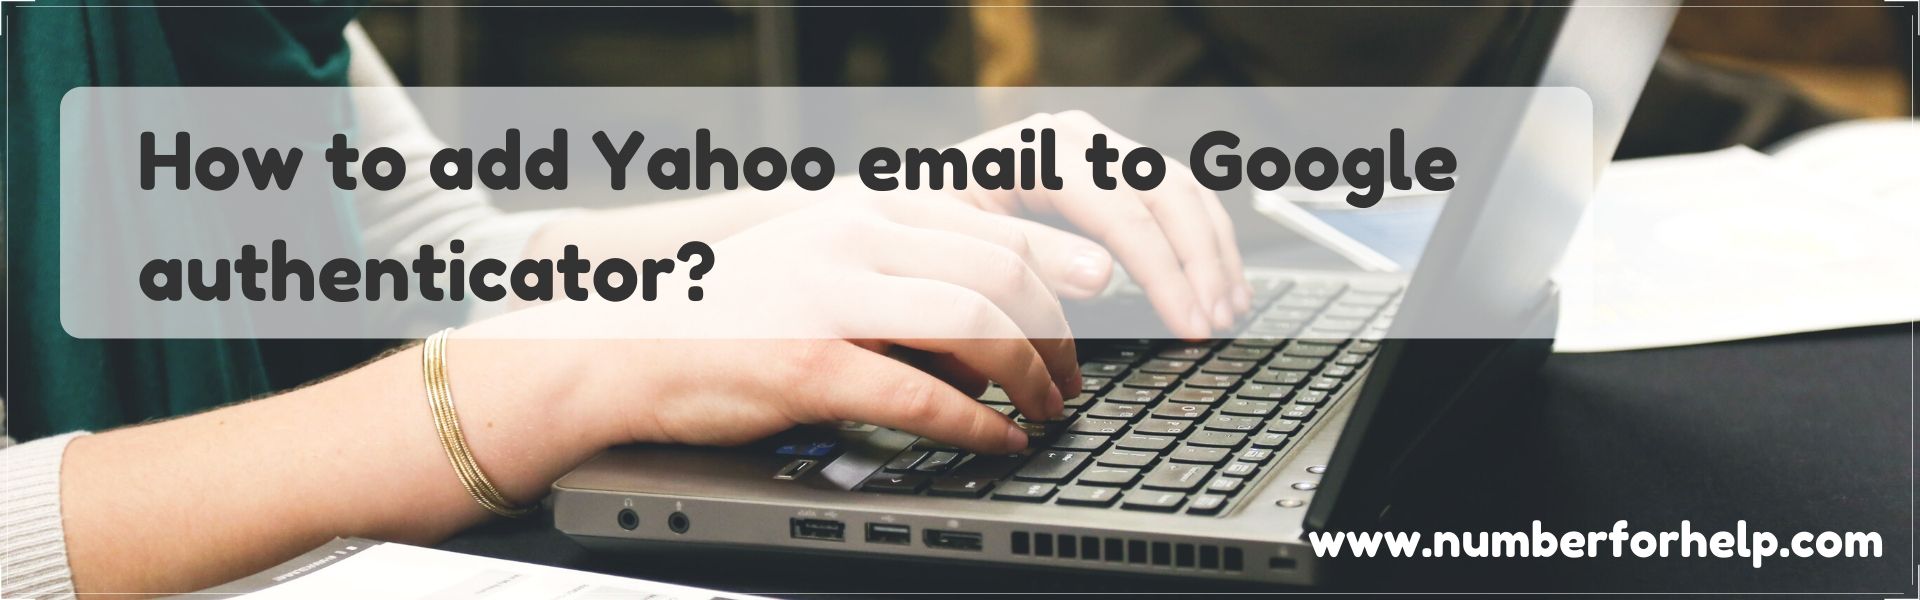 2020-04-30-04-07-04How to add Yahoo email to Google authenticator